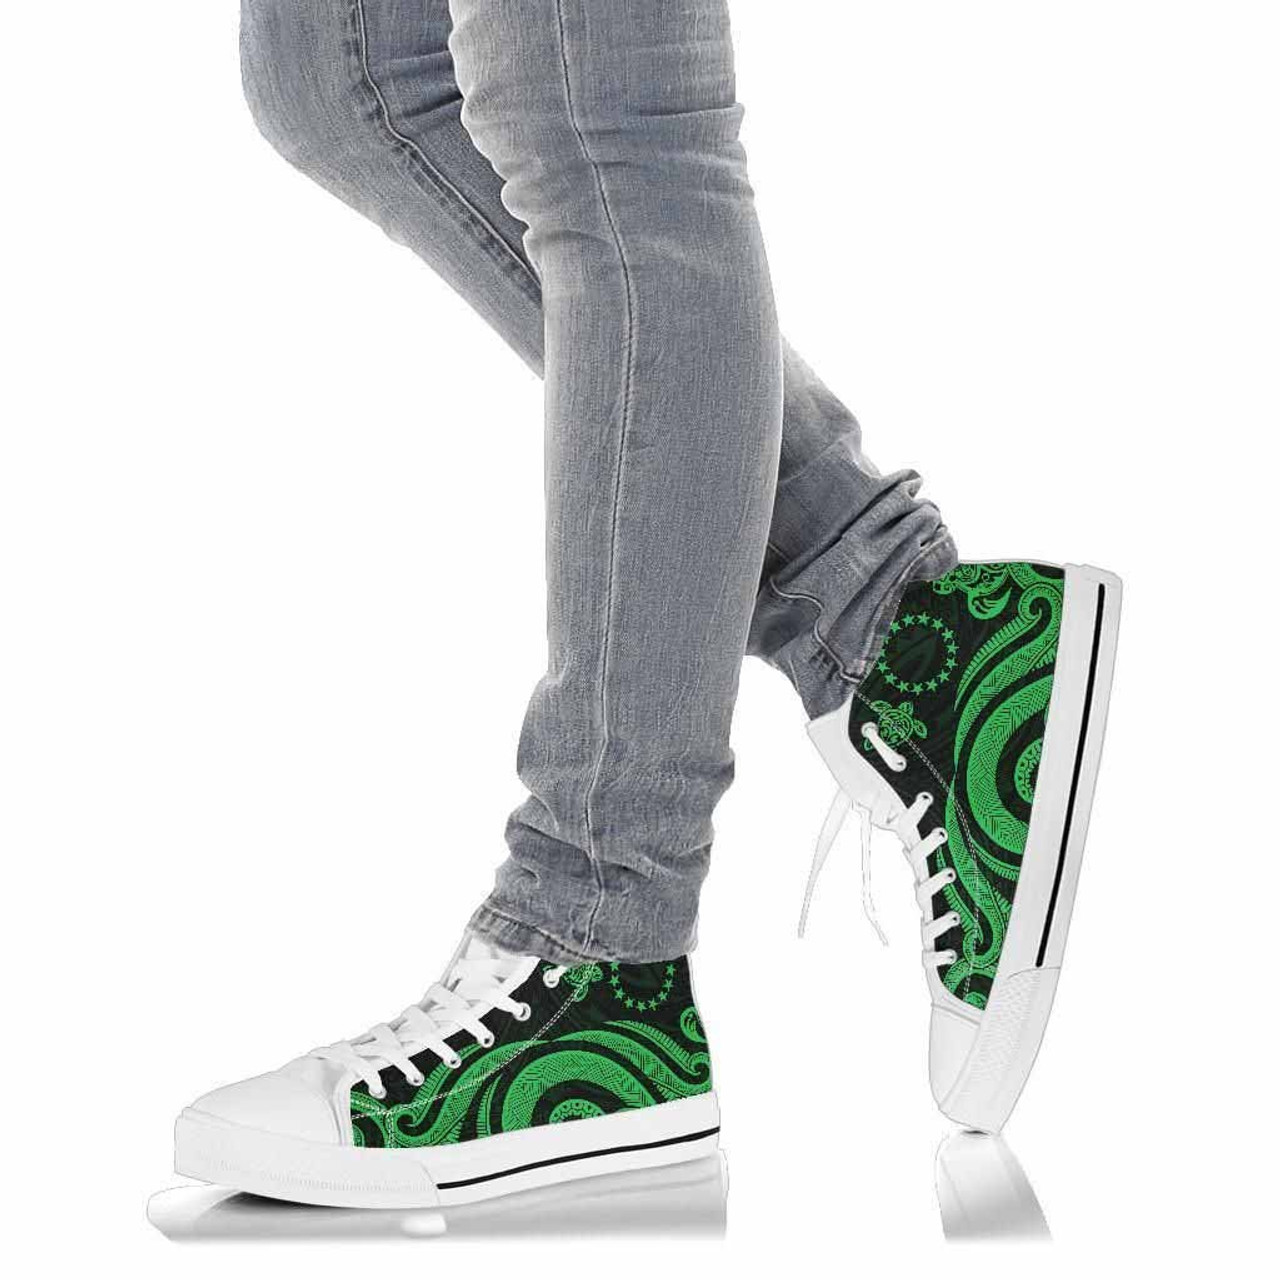 Cook Islands High Top Canvas Shoes - Green Tentacle Turtle 9